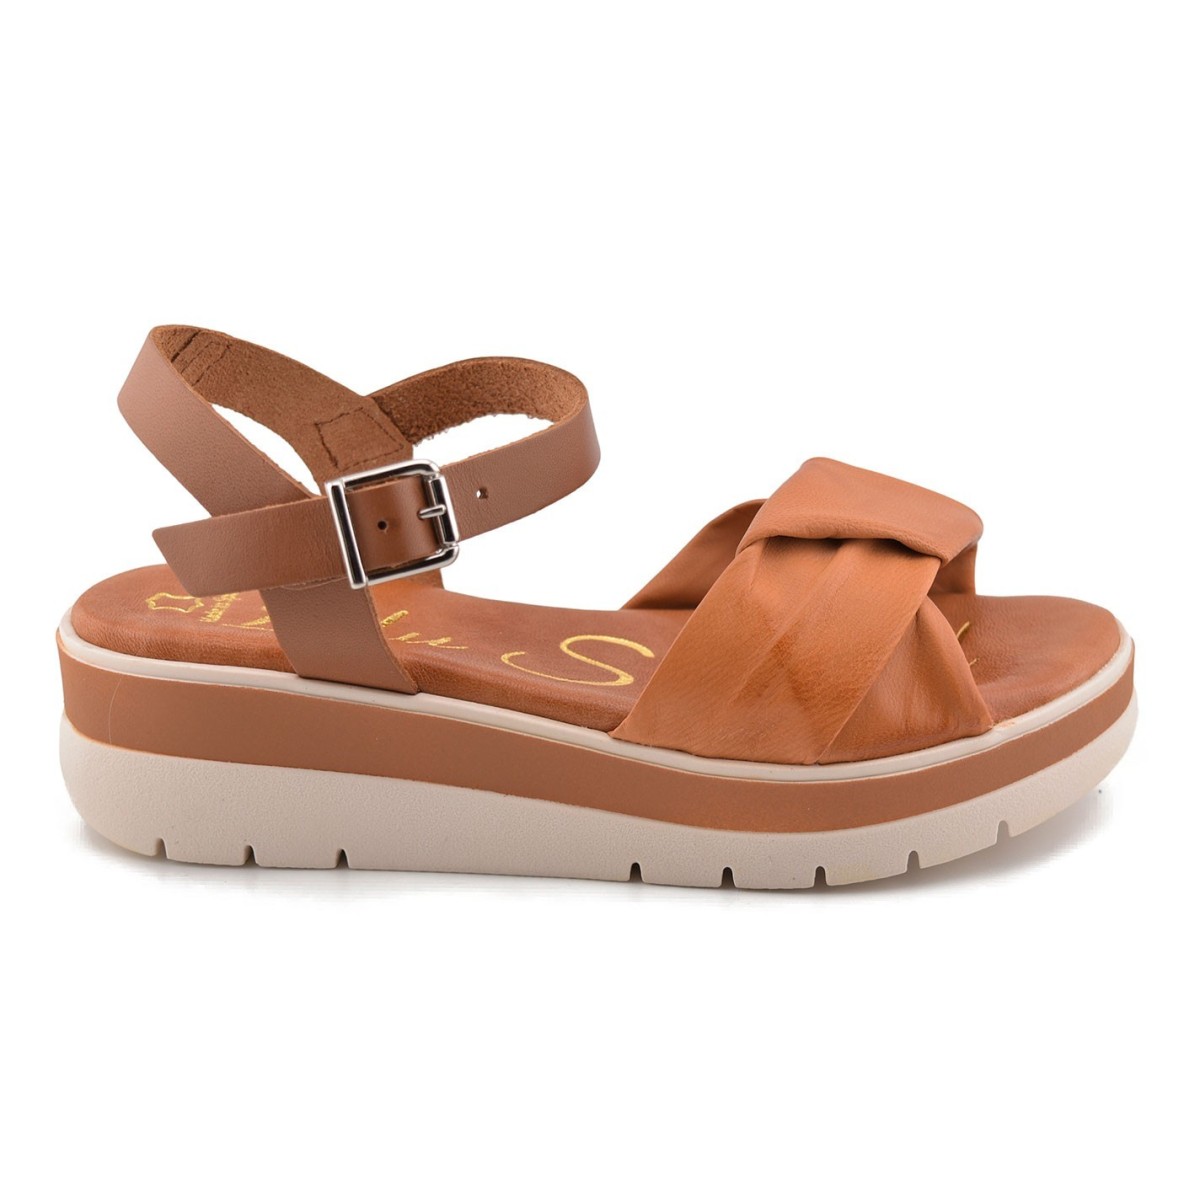 Brown leather sandals by Blusandal